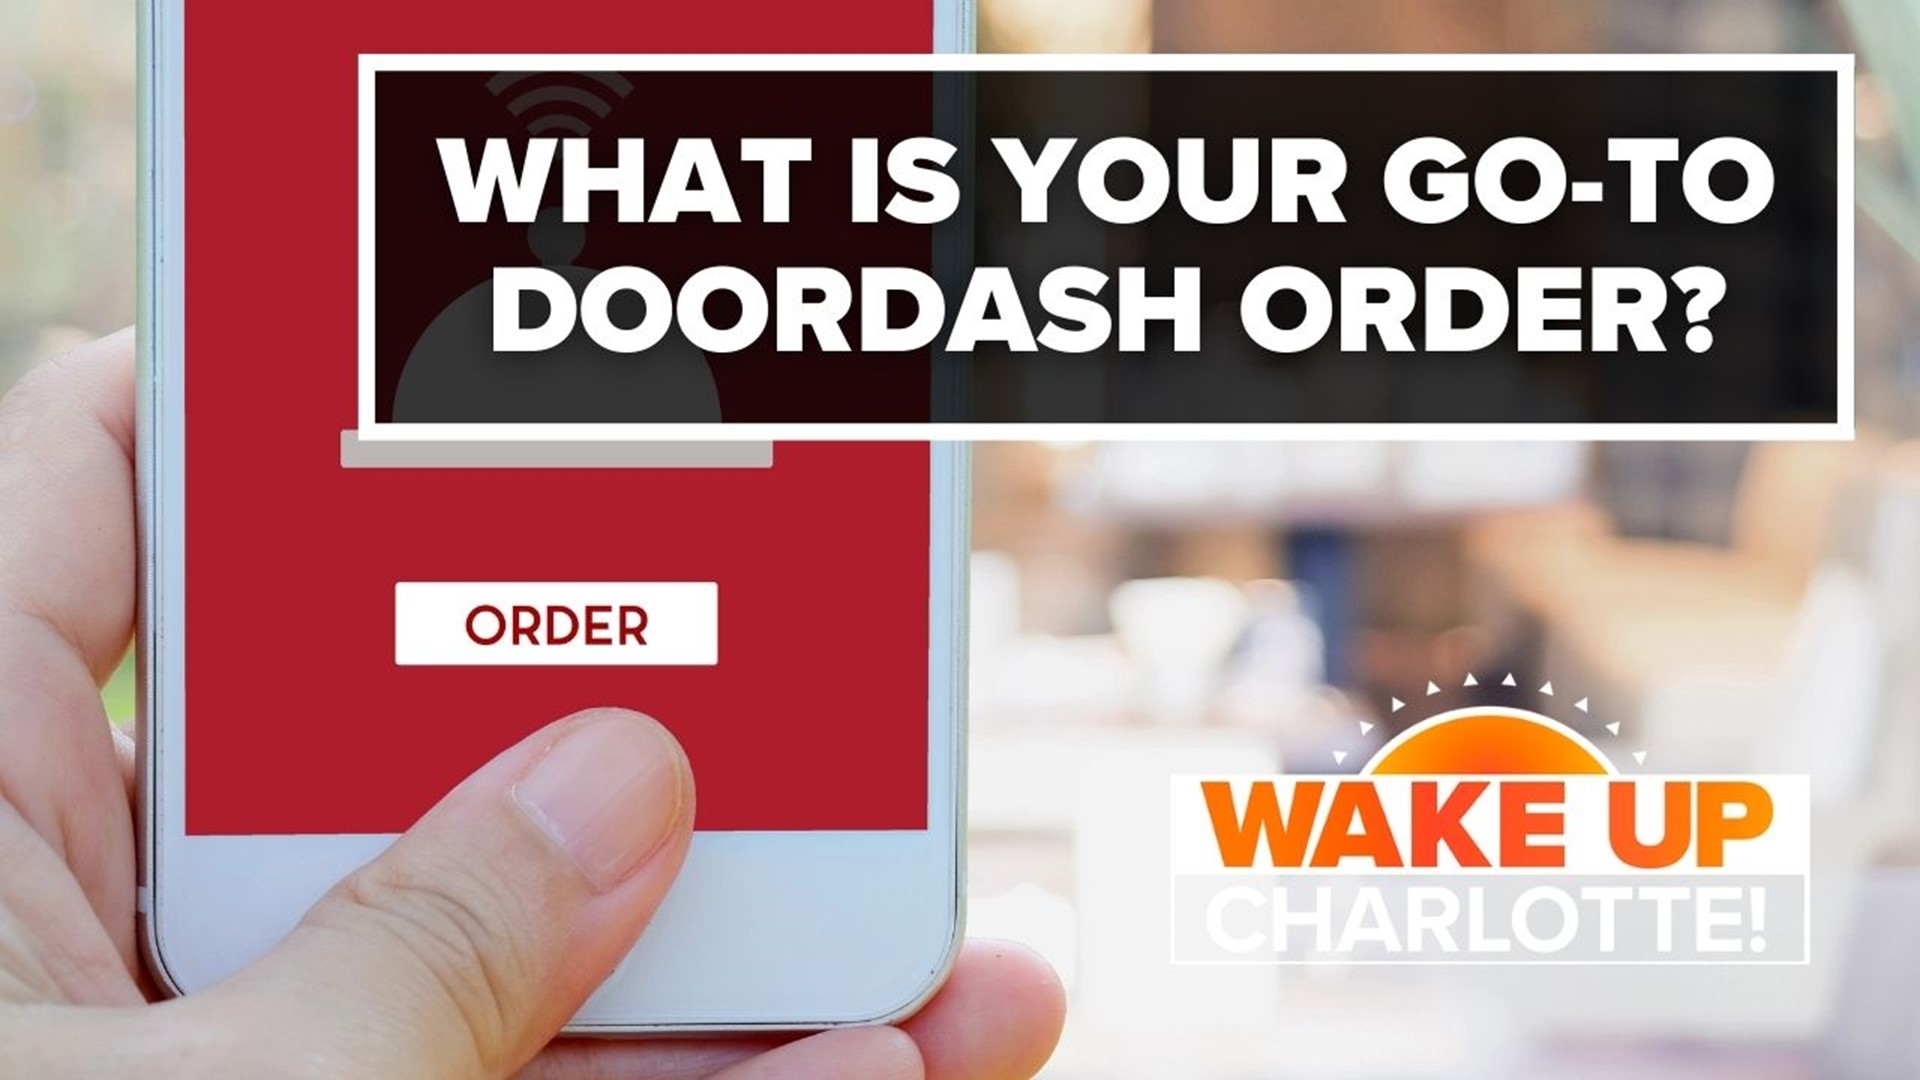 DoorDash released its list of the most popular delivery items, with french fries, burritos and chicken coming in the top 3 slots. What's your go-to takeout order?